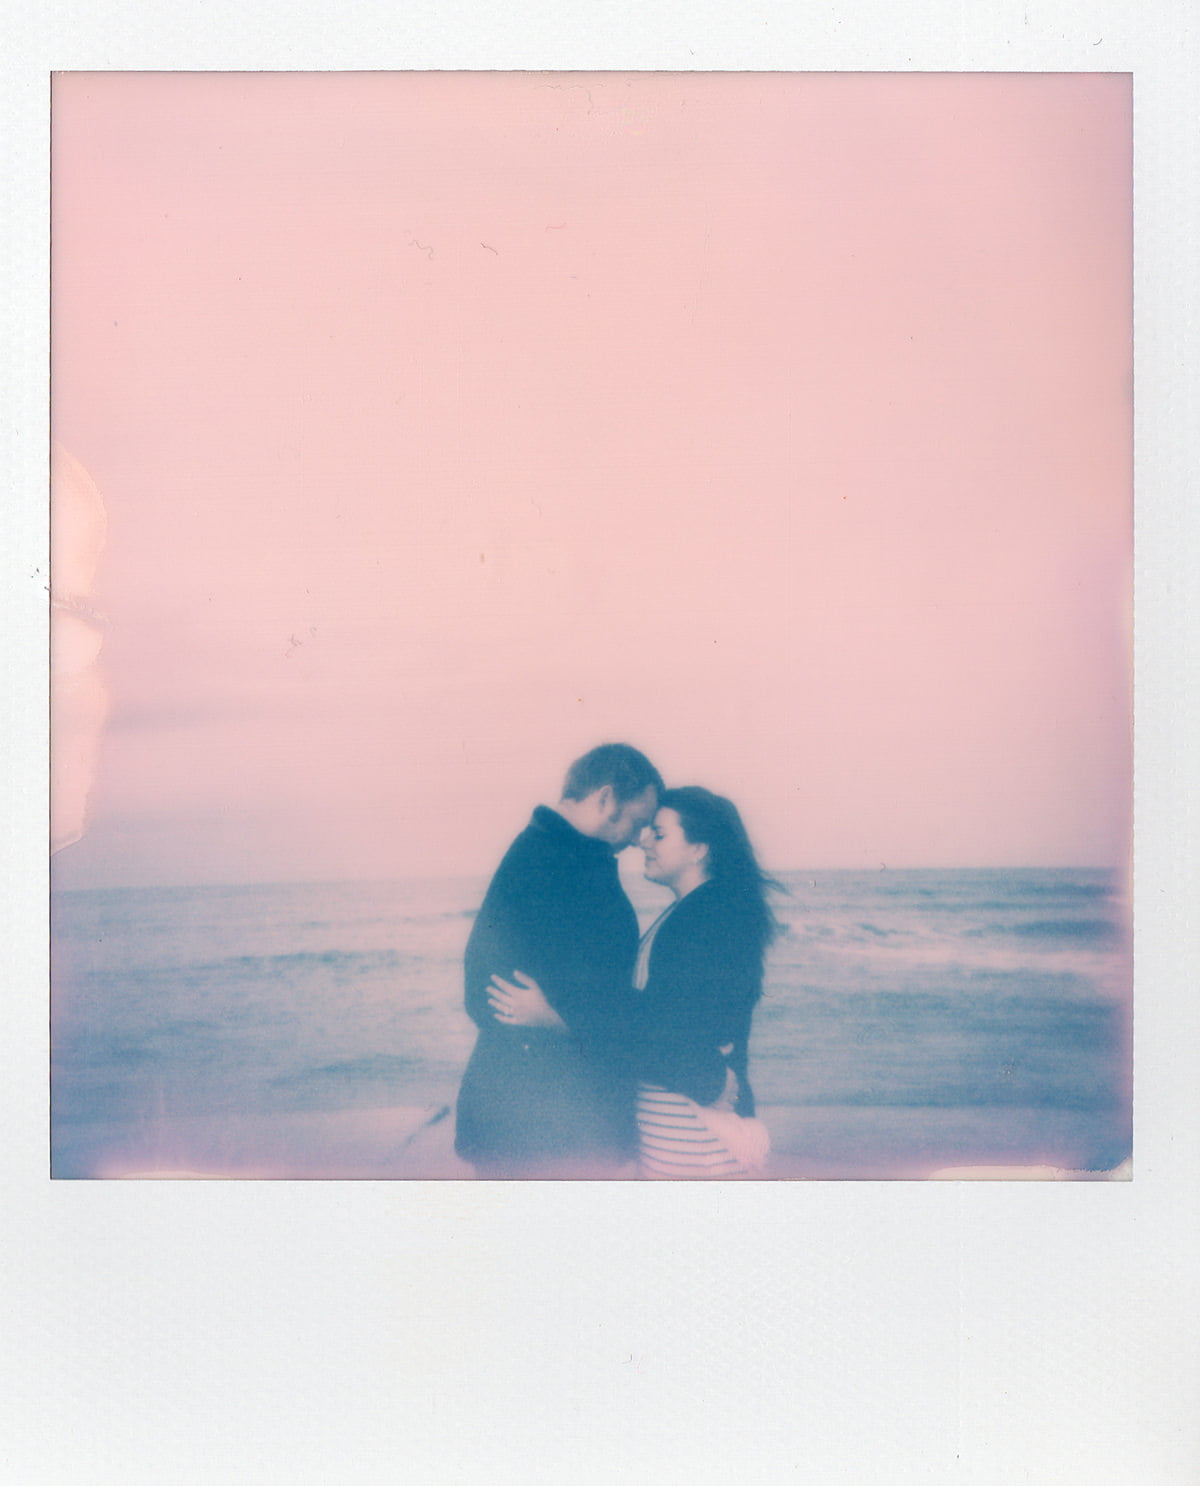 Impossible-Project-Polaroid-Film-Artistic-Quirky-Wedding-Photography-001